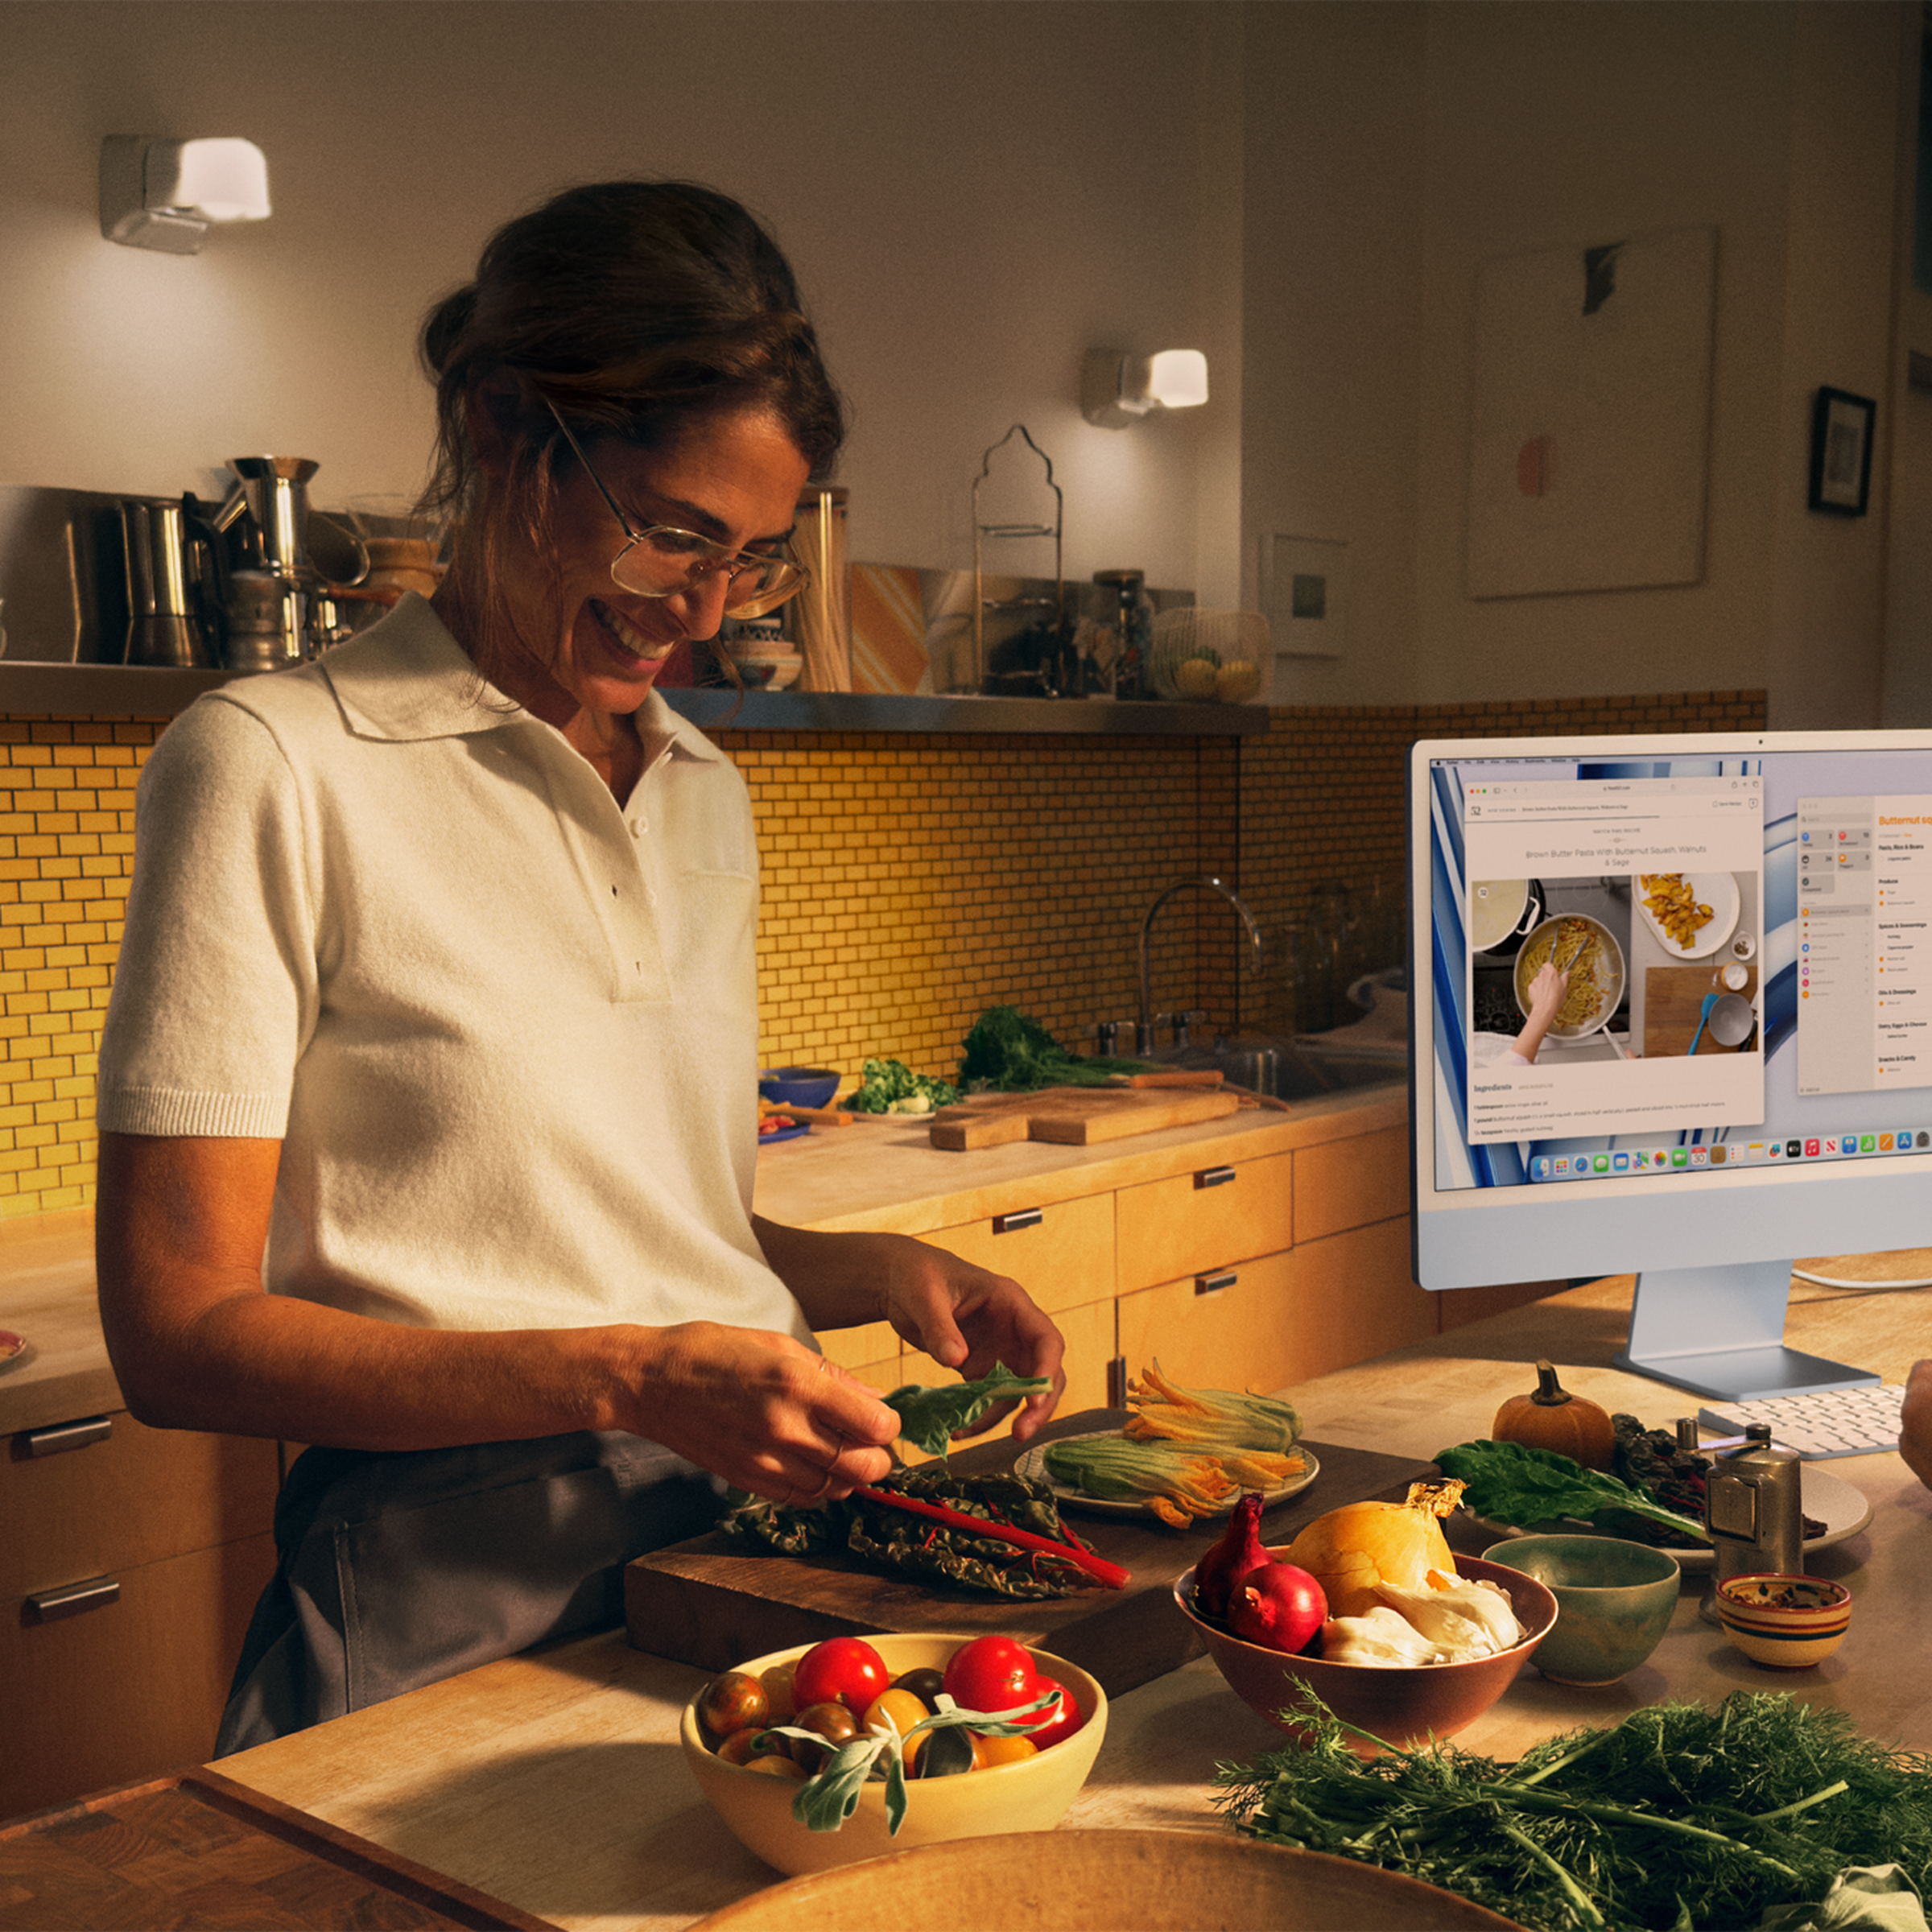 Person cooking in kitchen with blue iMac in background